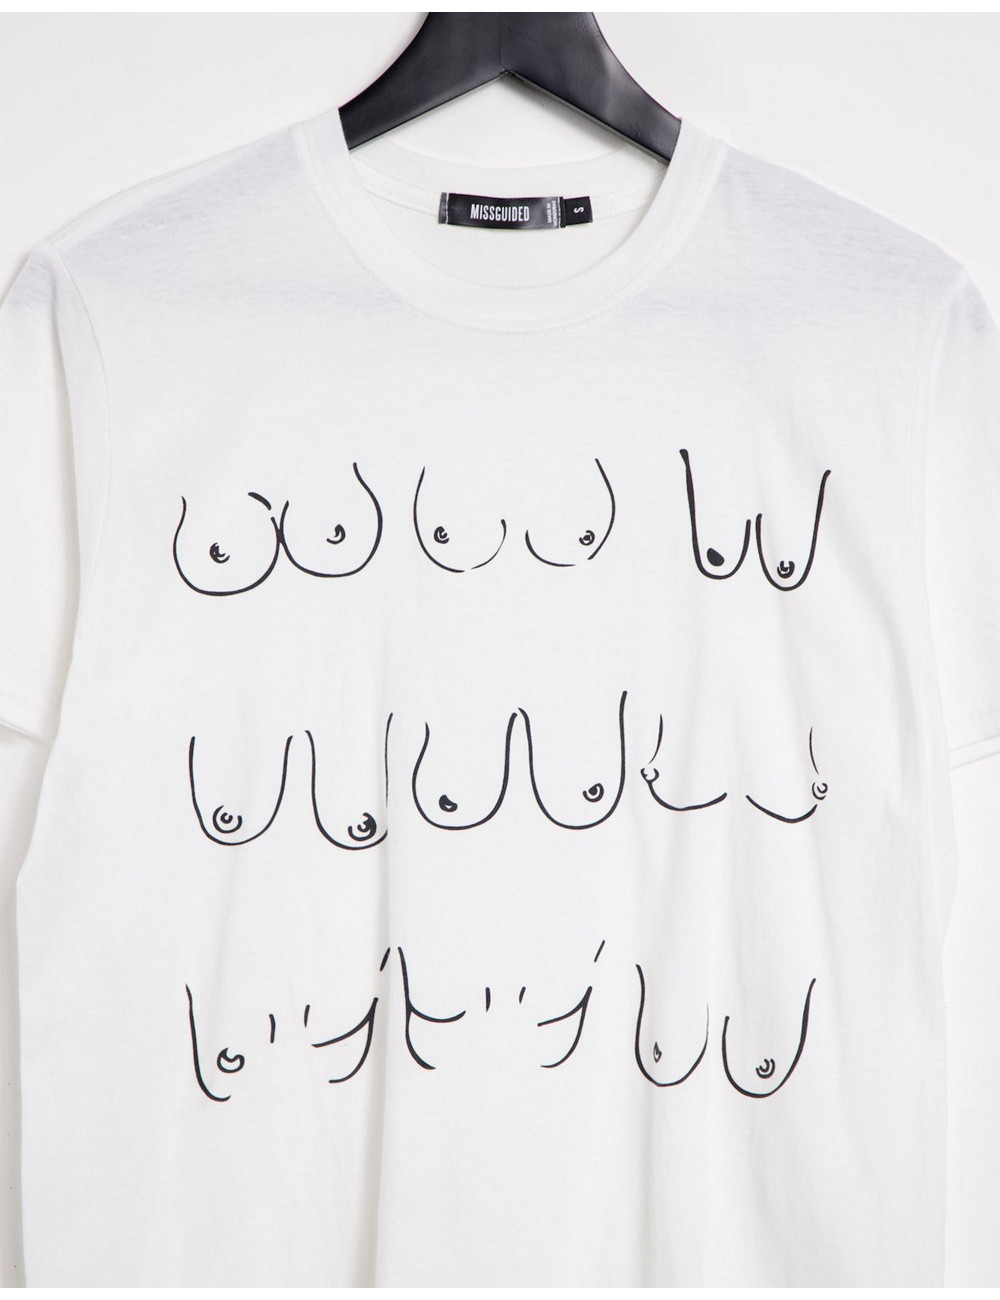 Missguided charity t-shirt...